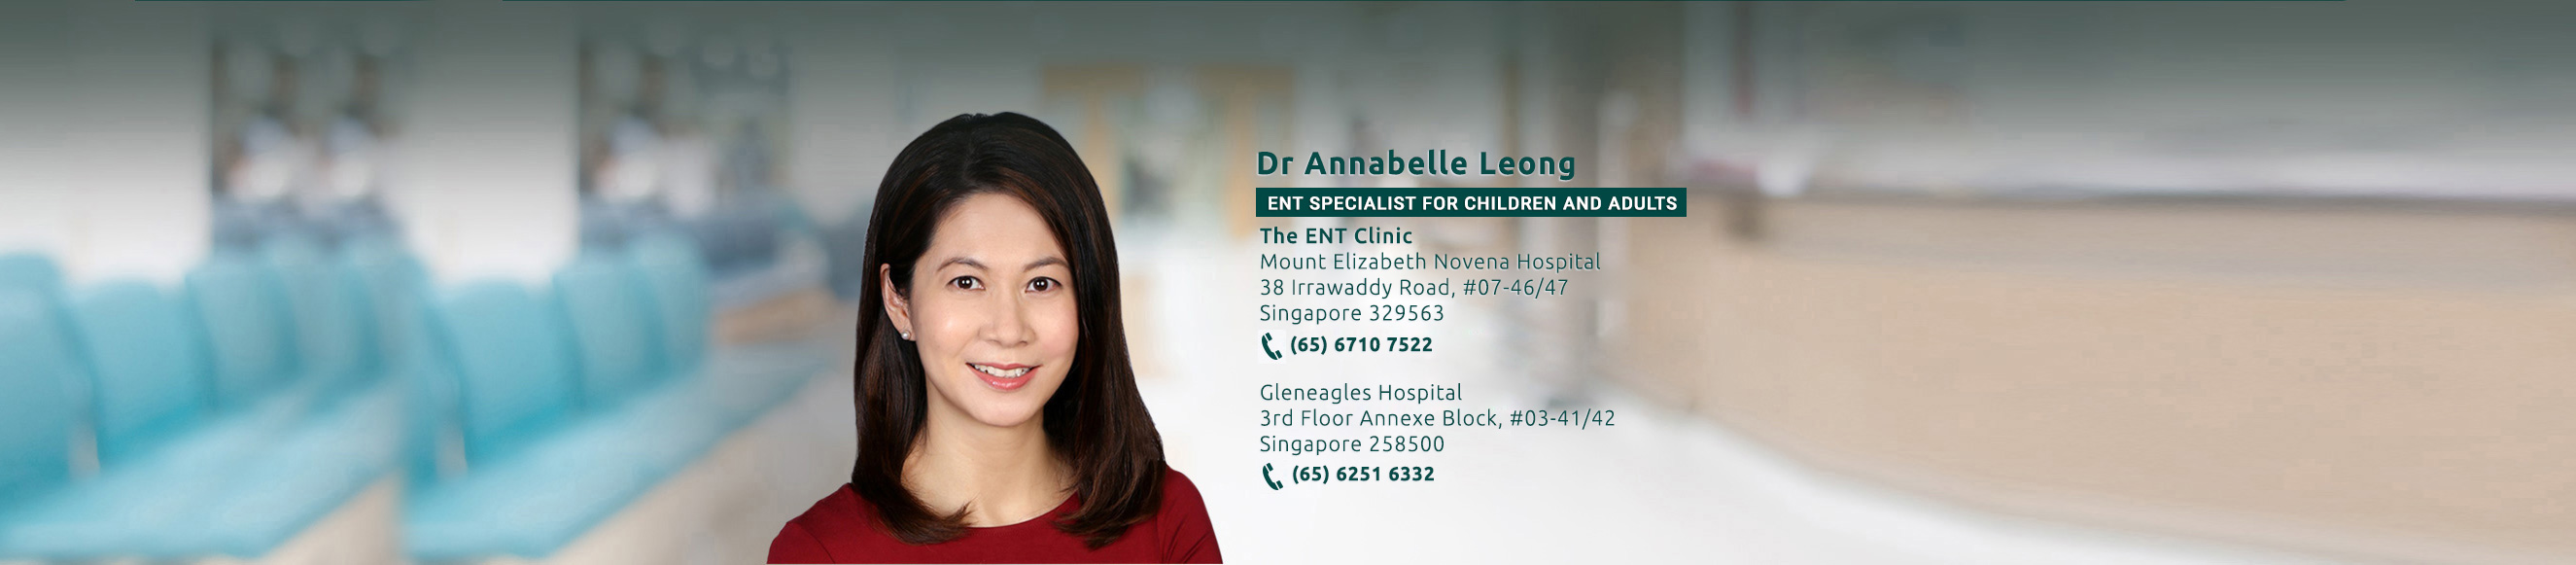 Ear, Nose and Throat Specialist Singapore